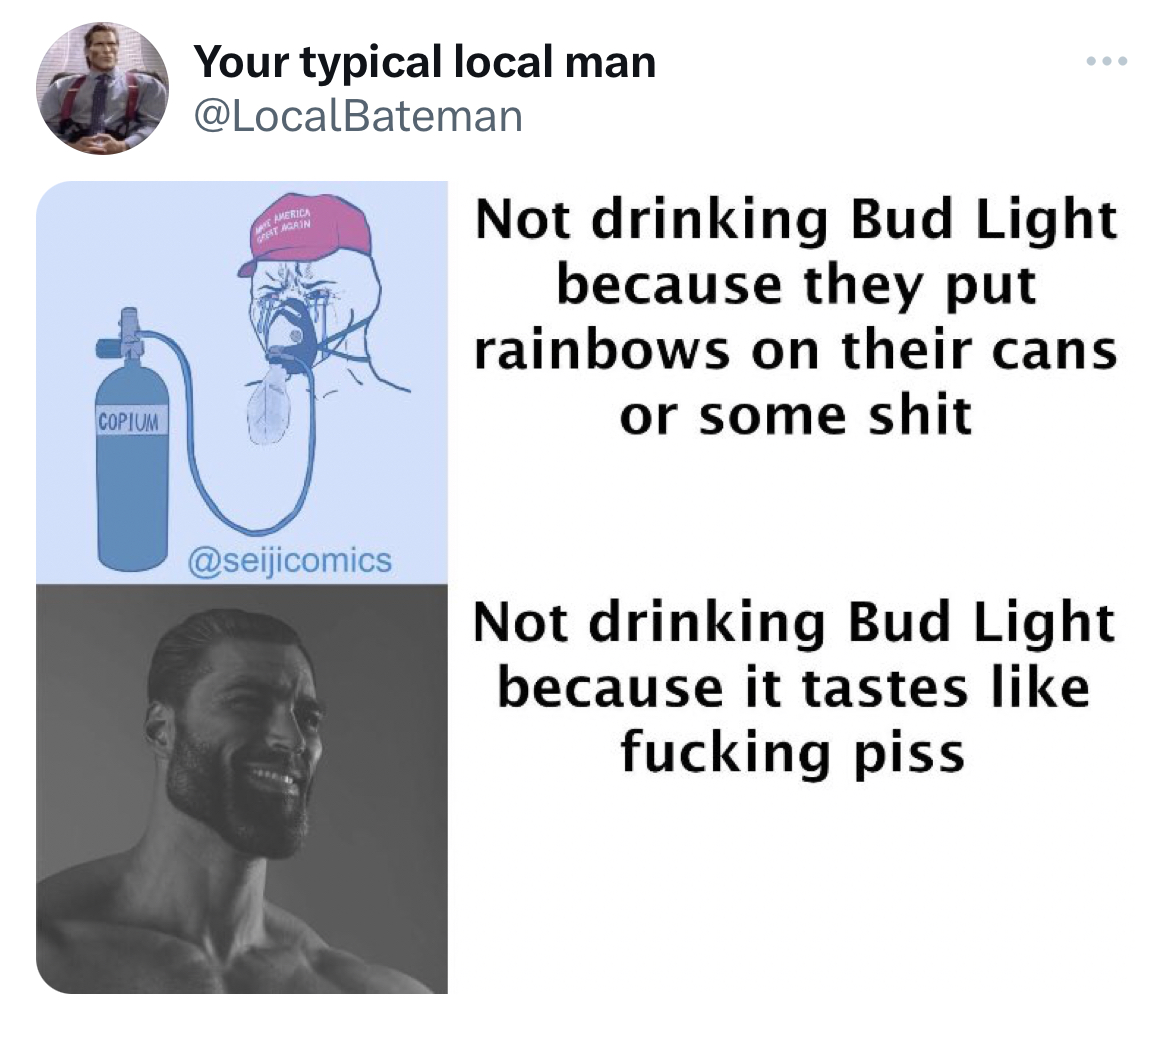 savage tweets - pour la fête des mères - Copium Your typical local man Not drinking Bud Light because they put rainbows on their cans or some shit Not drinking Bud Light because it tastes fucking piss